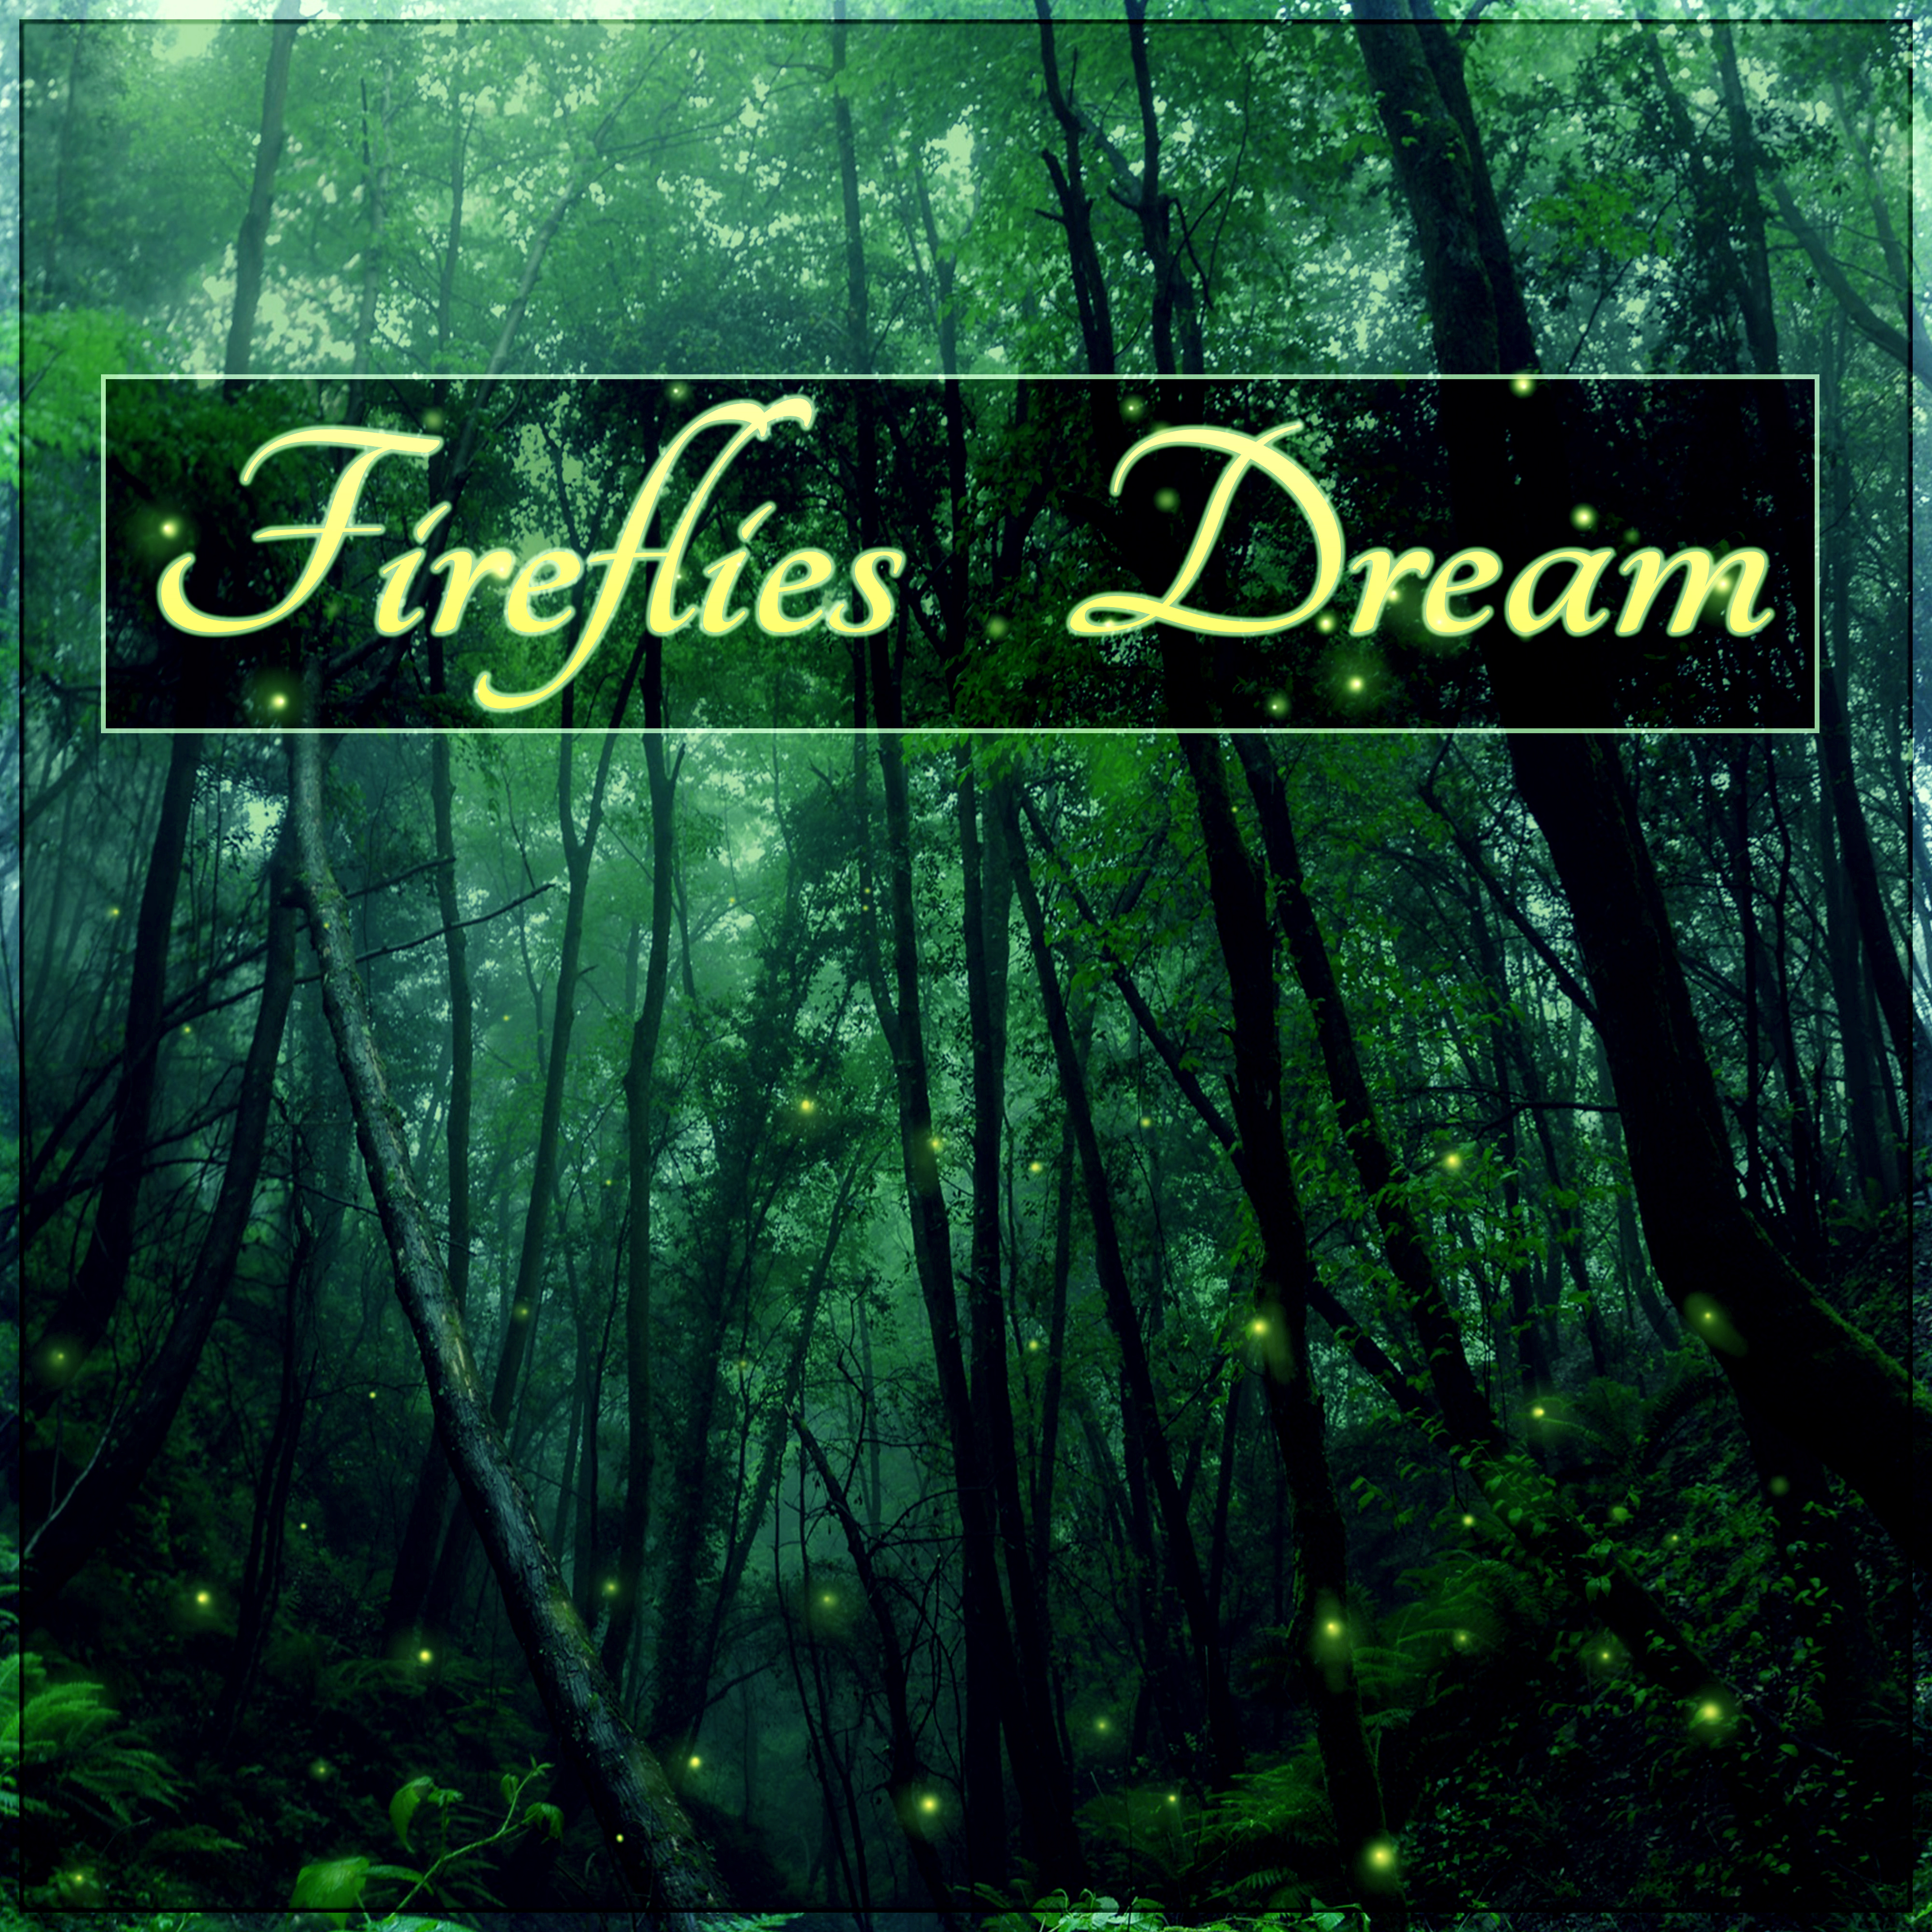 Fireflies Dream - Gentle Instrumental Music and Pure Nature Sounds for Relaxation, Sound Therapy, Healing Massage, Wellness Spa